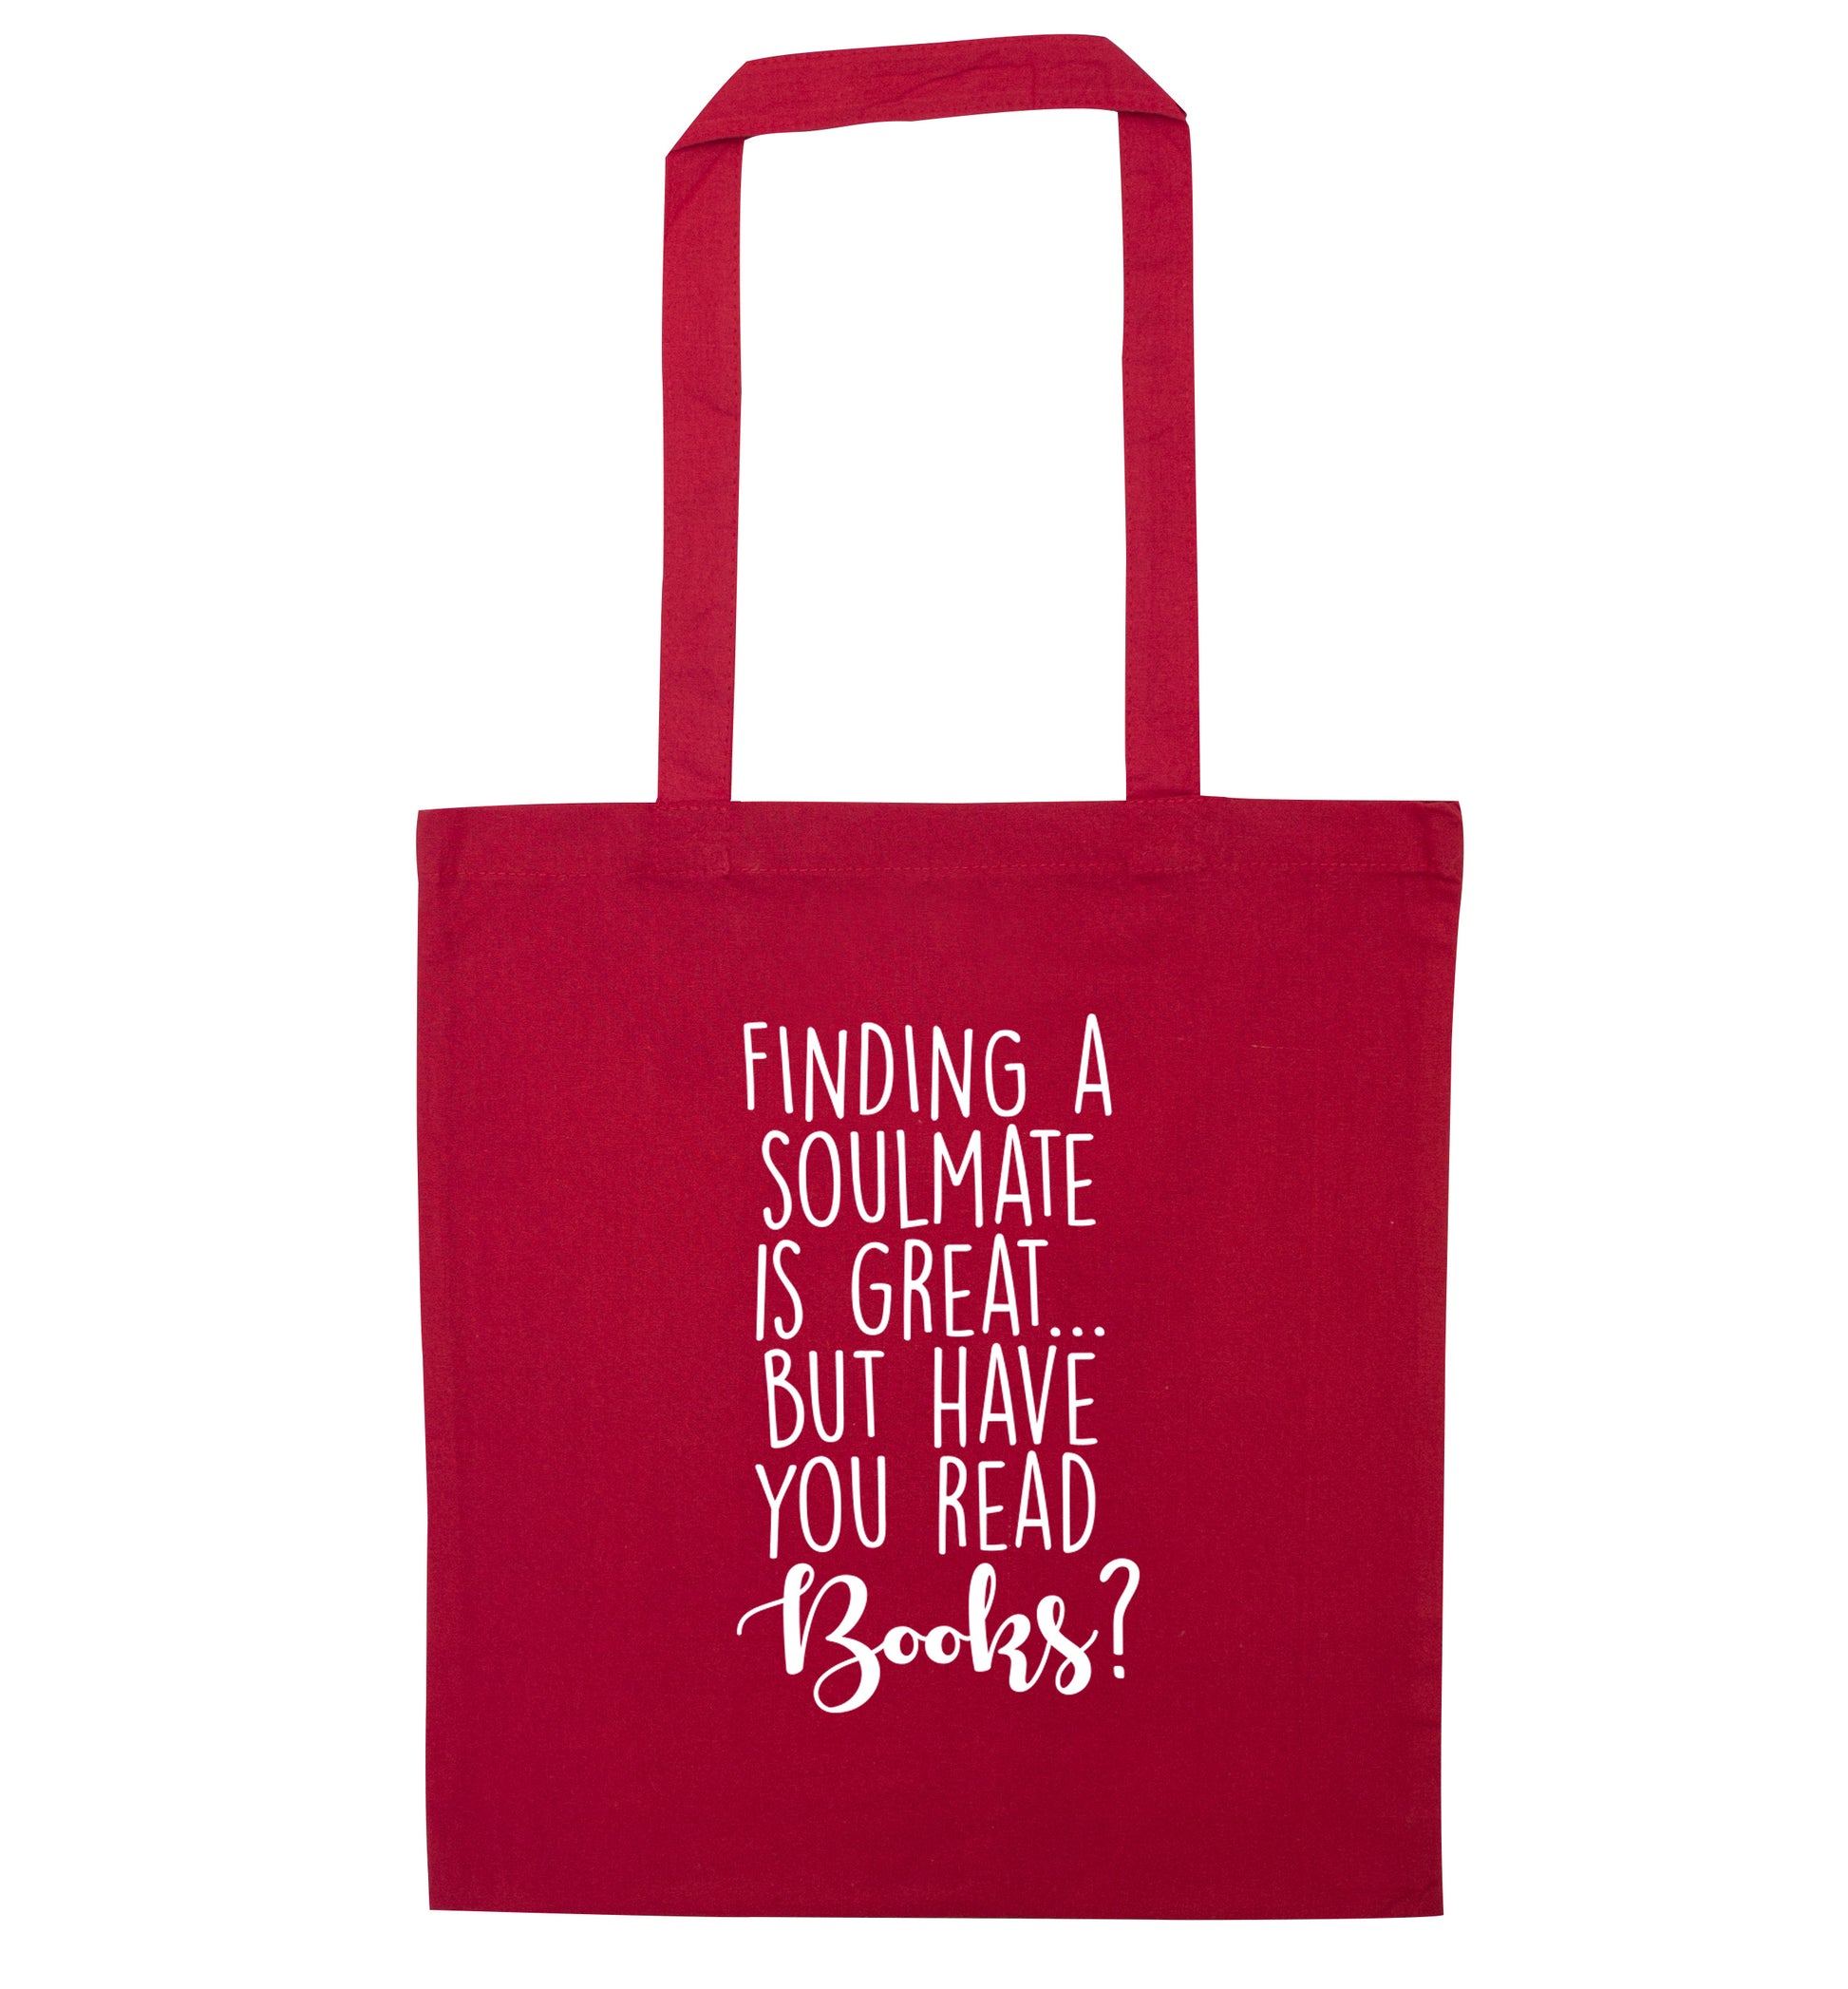 Finding a soulmate is great but have you read books? red tote bag